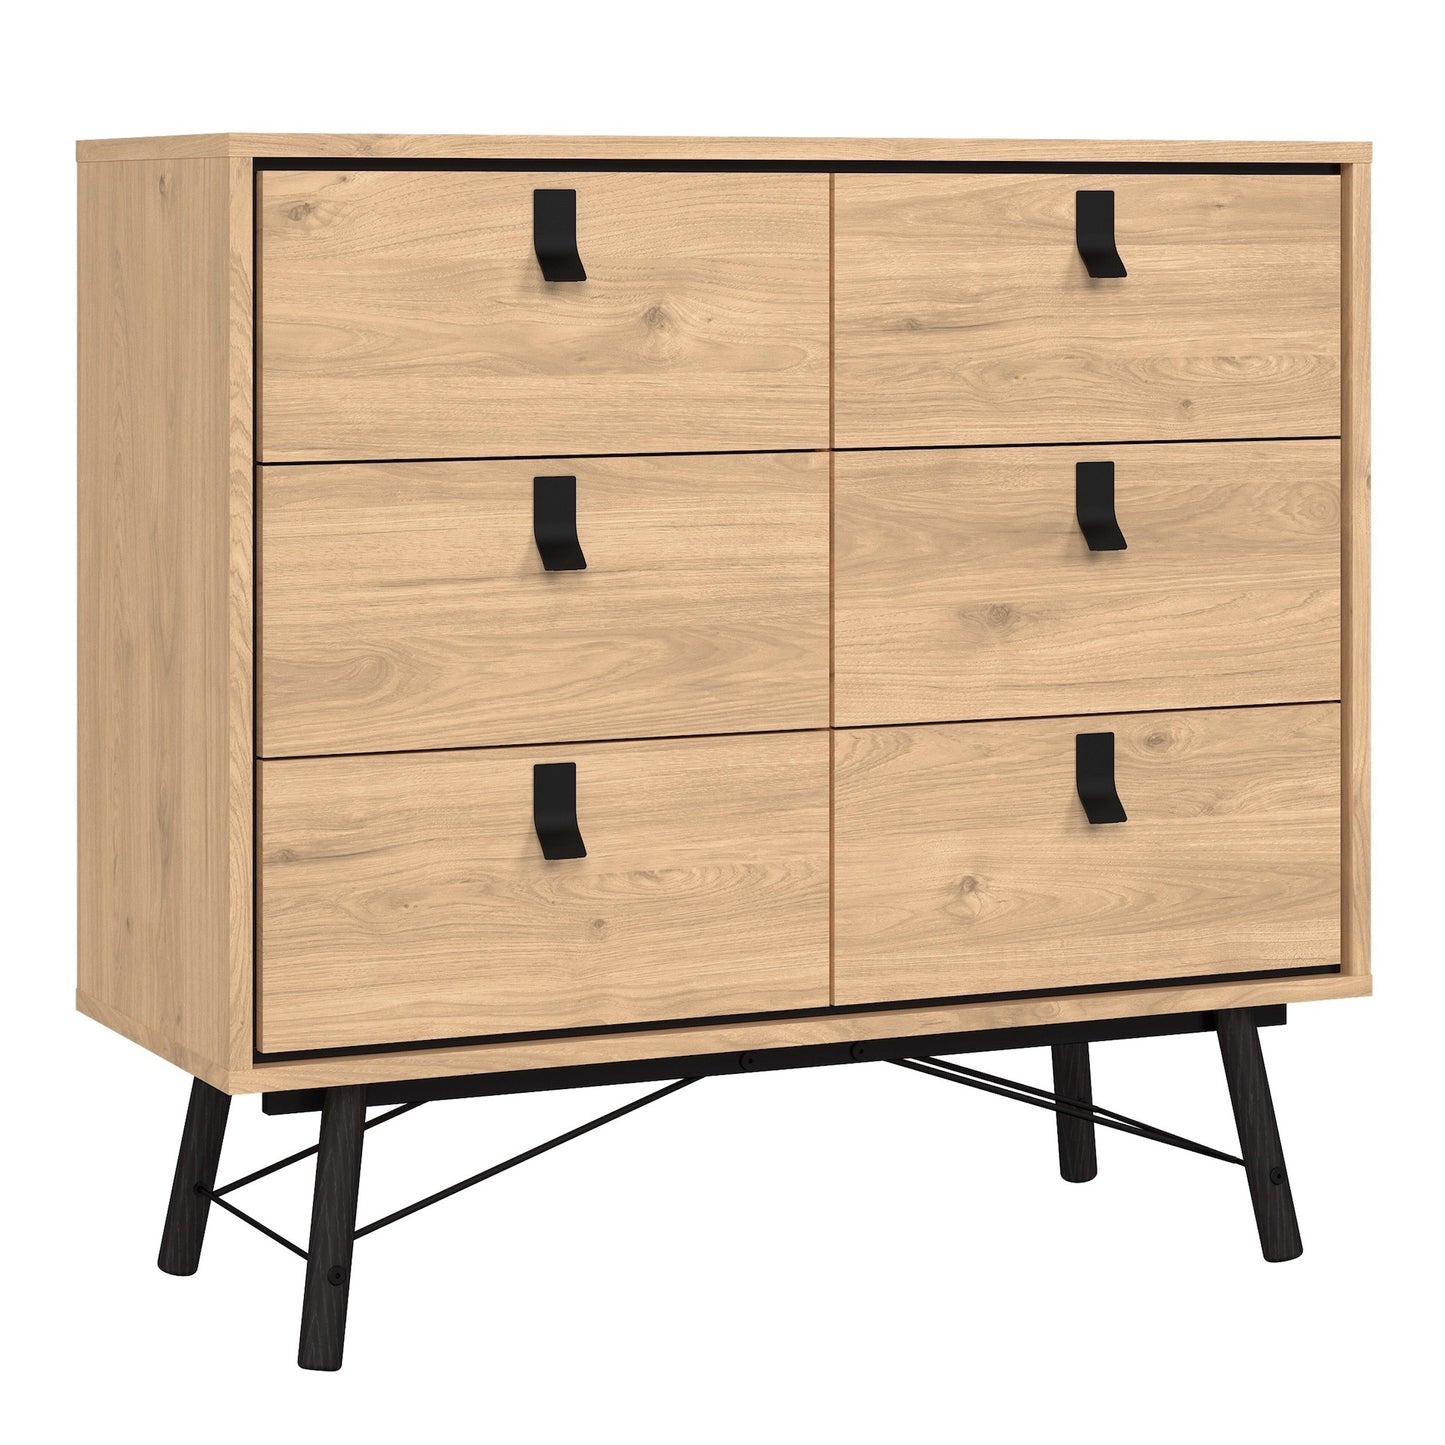 Furniture To Go Ry Small Double Chest of Drawers 6 Drawers in Jackson Hickory Oak